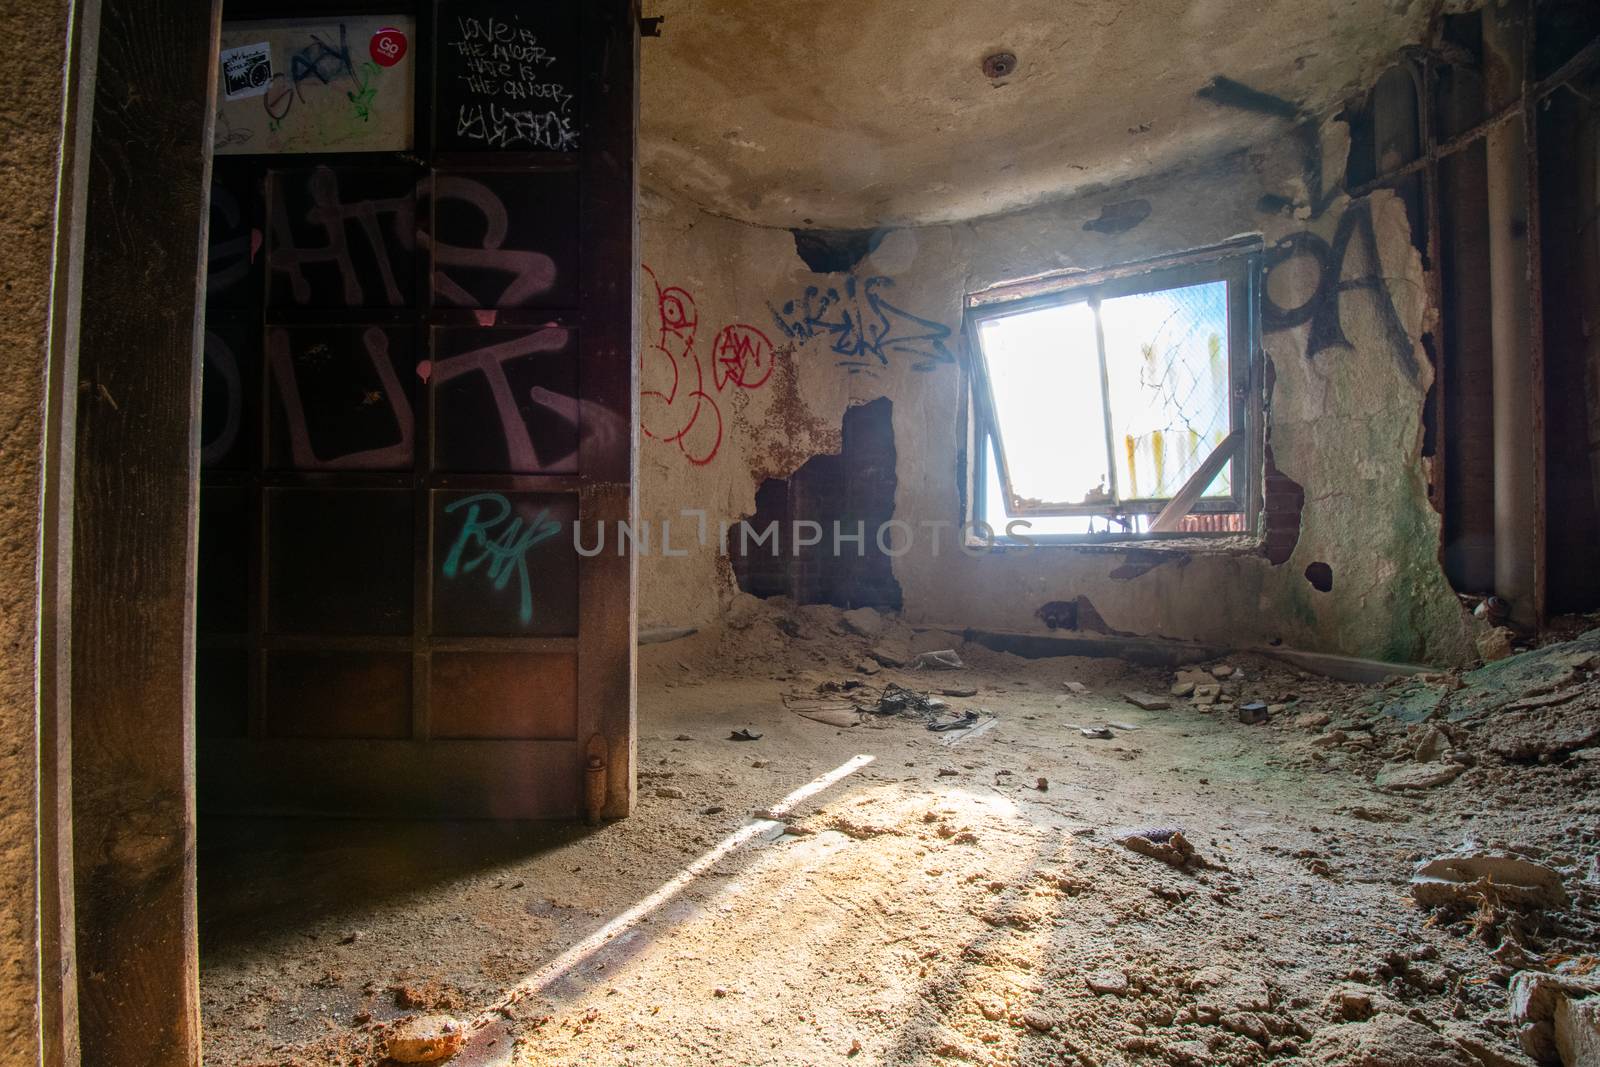 A Small Room in an Abandoned Building Covered in Graffiti by bju12290